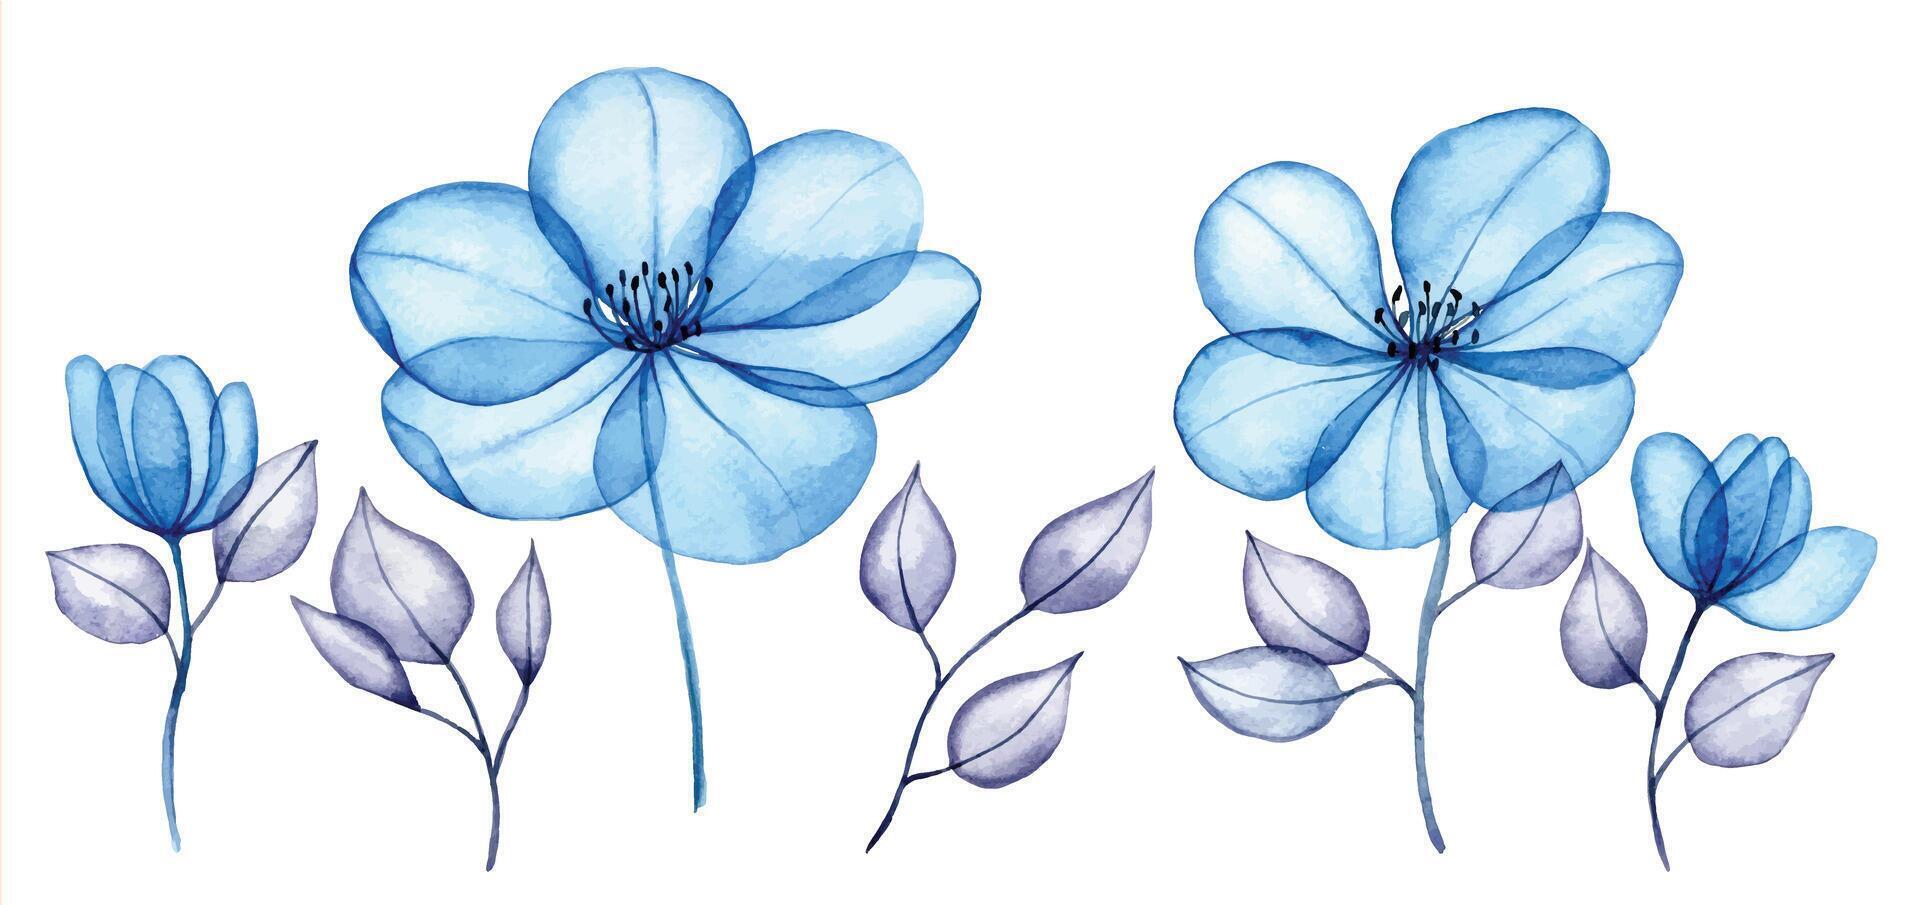 watercolor set of transparent flowers and leaves. transparent blue flowers in pastel colors. elements isolated on white background. design for wedding vector